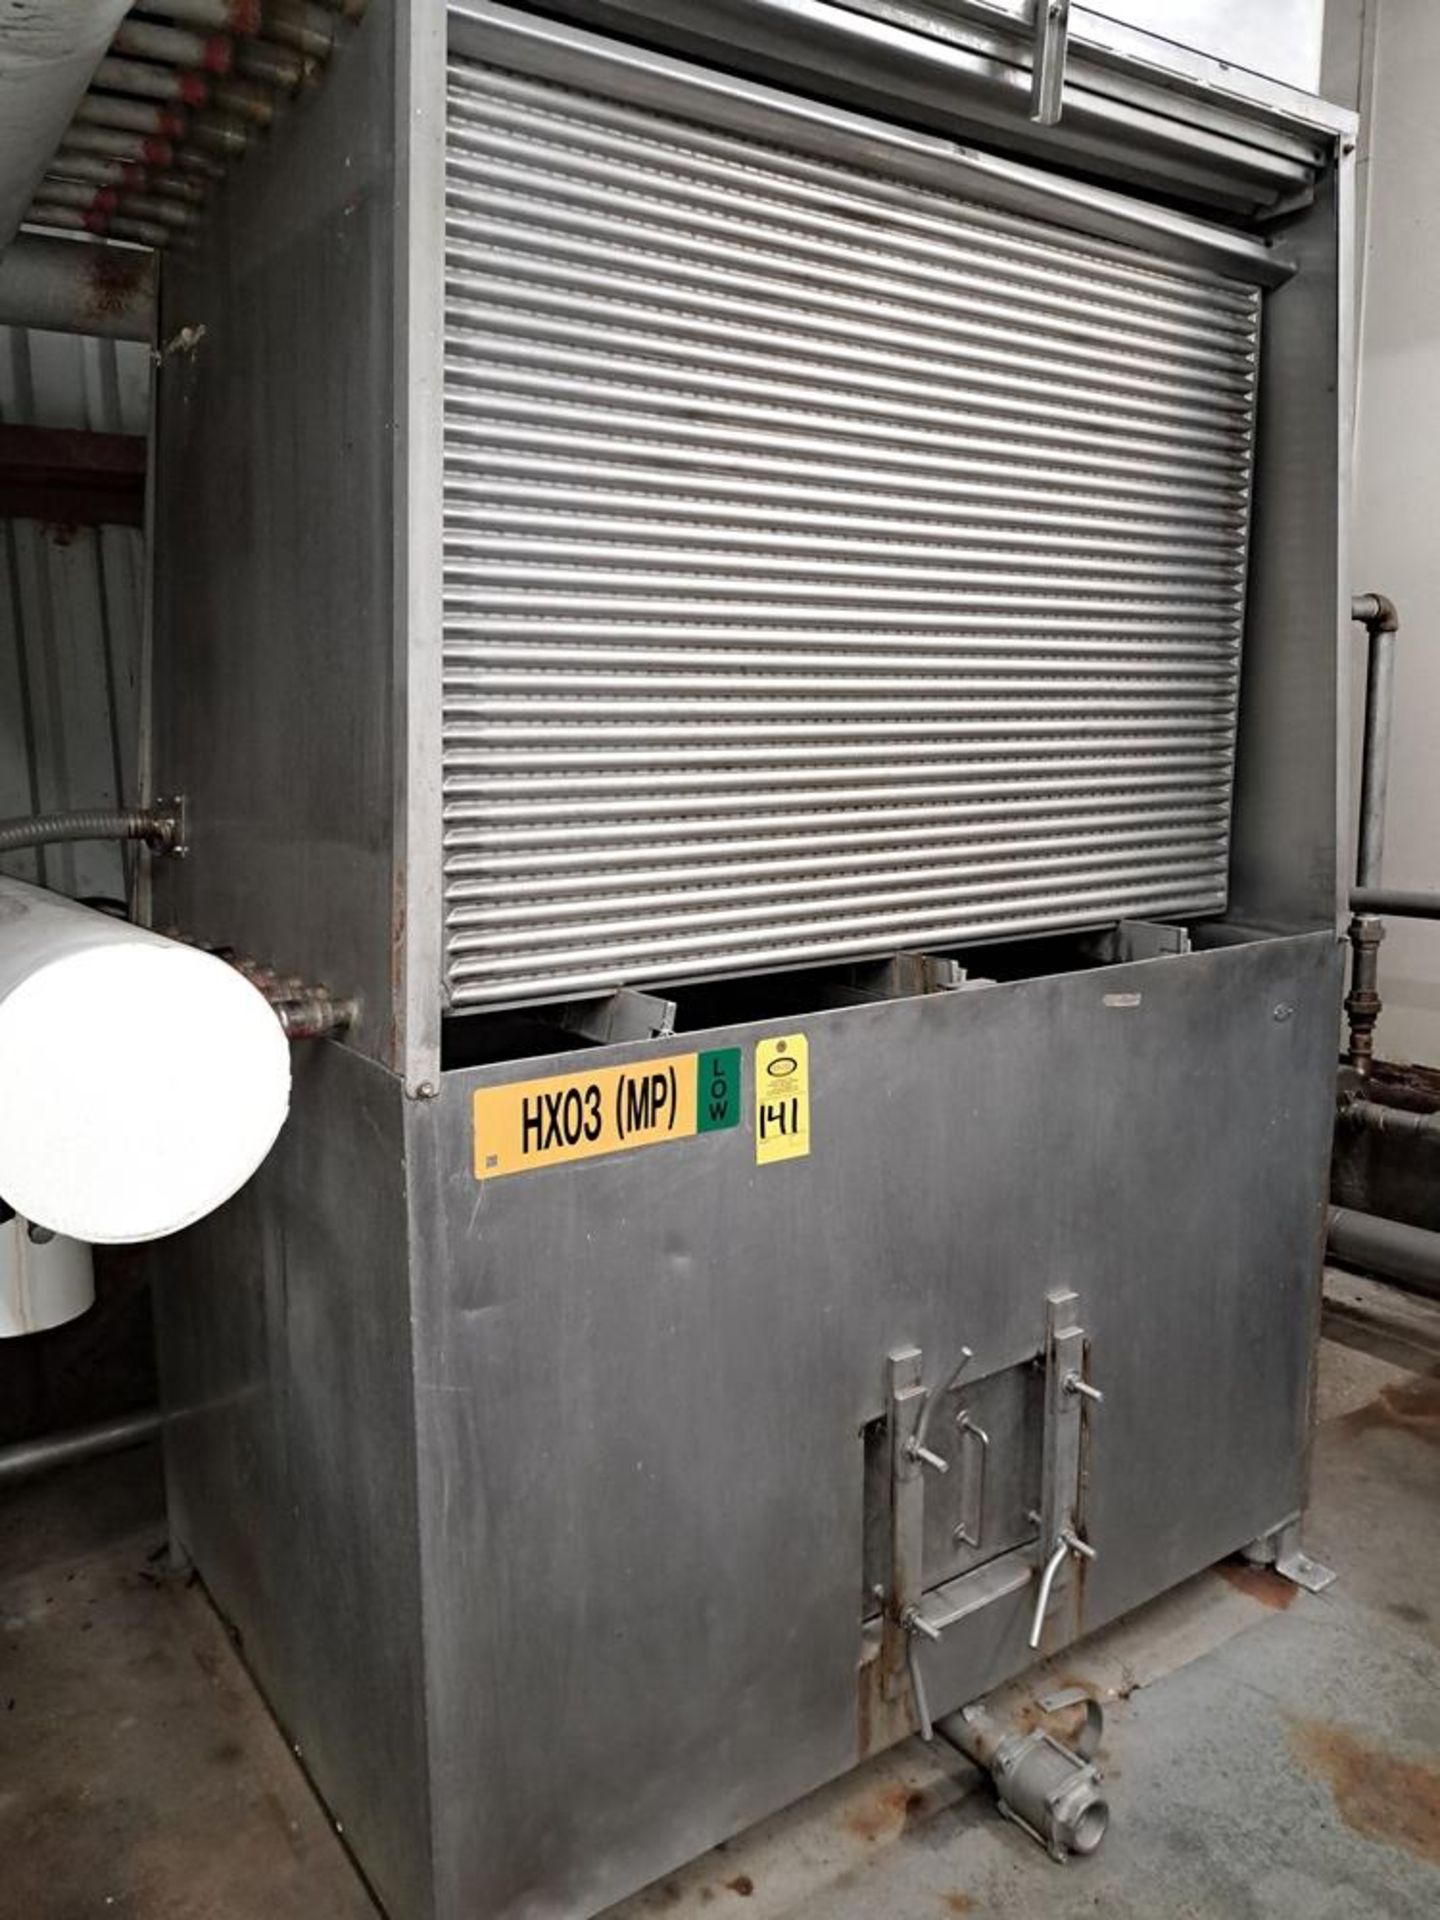 Stainless Steel Plate Chiller, 9 plates, 32 corrugations with filter, 5 h.p., 230/460 volt motor - Image 2 of 5